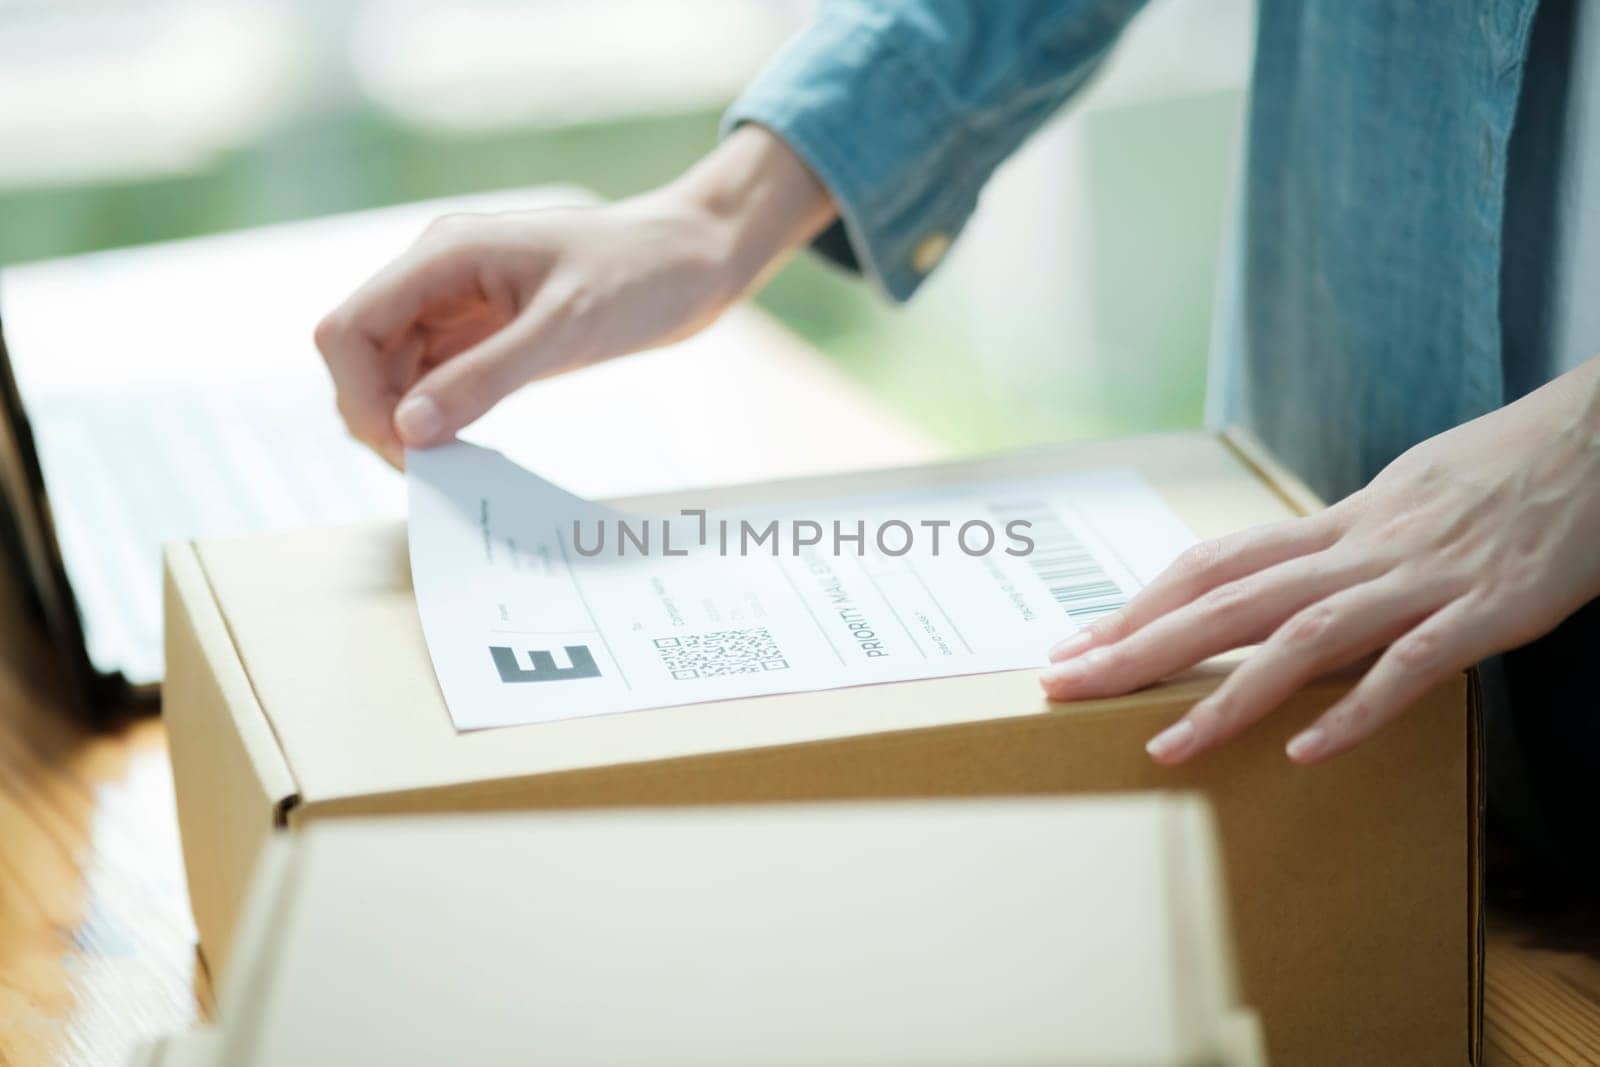 Attaching shipping label to a parcel. E-commerce business shipment preparation. Close-up of package labeling process.